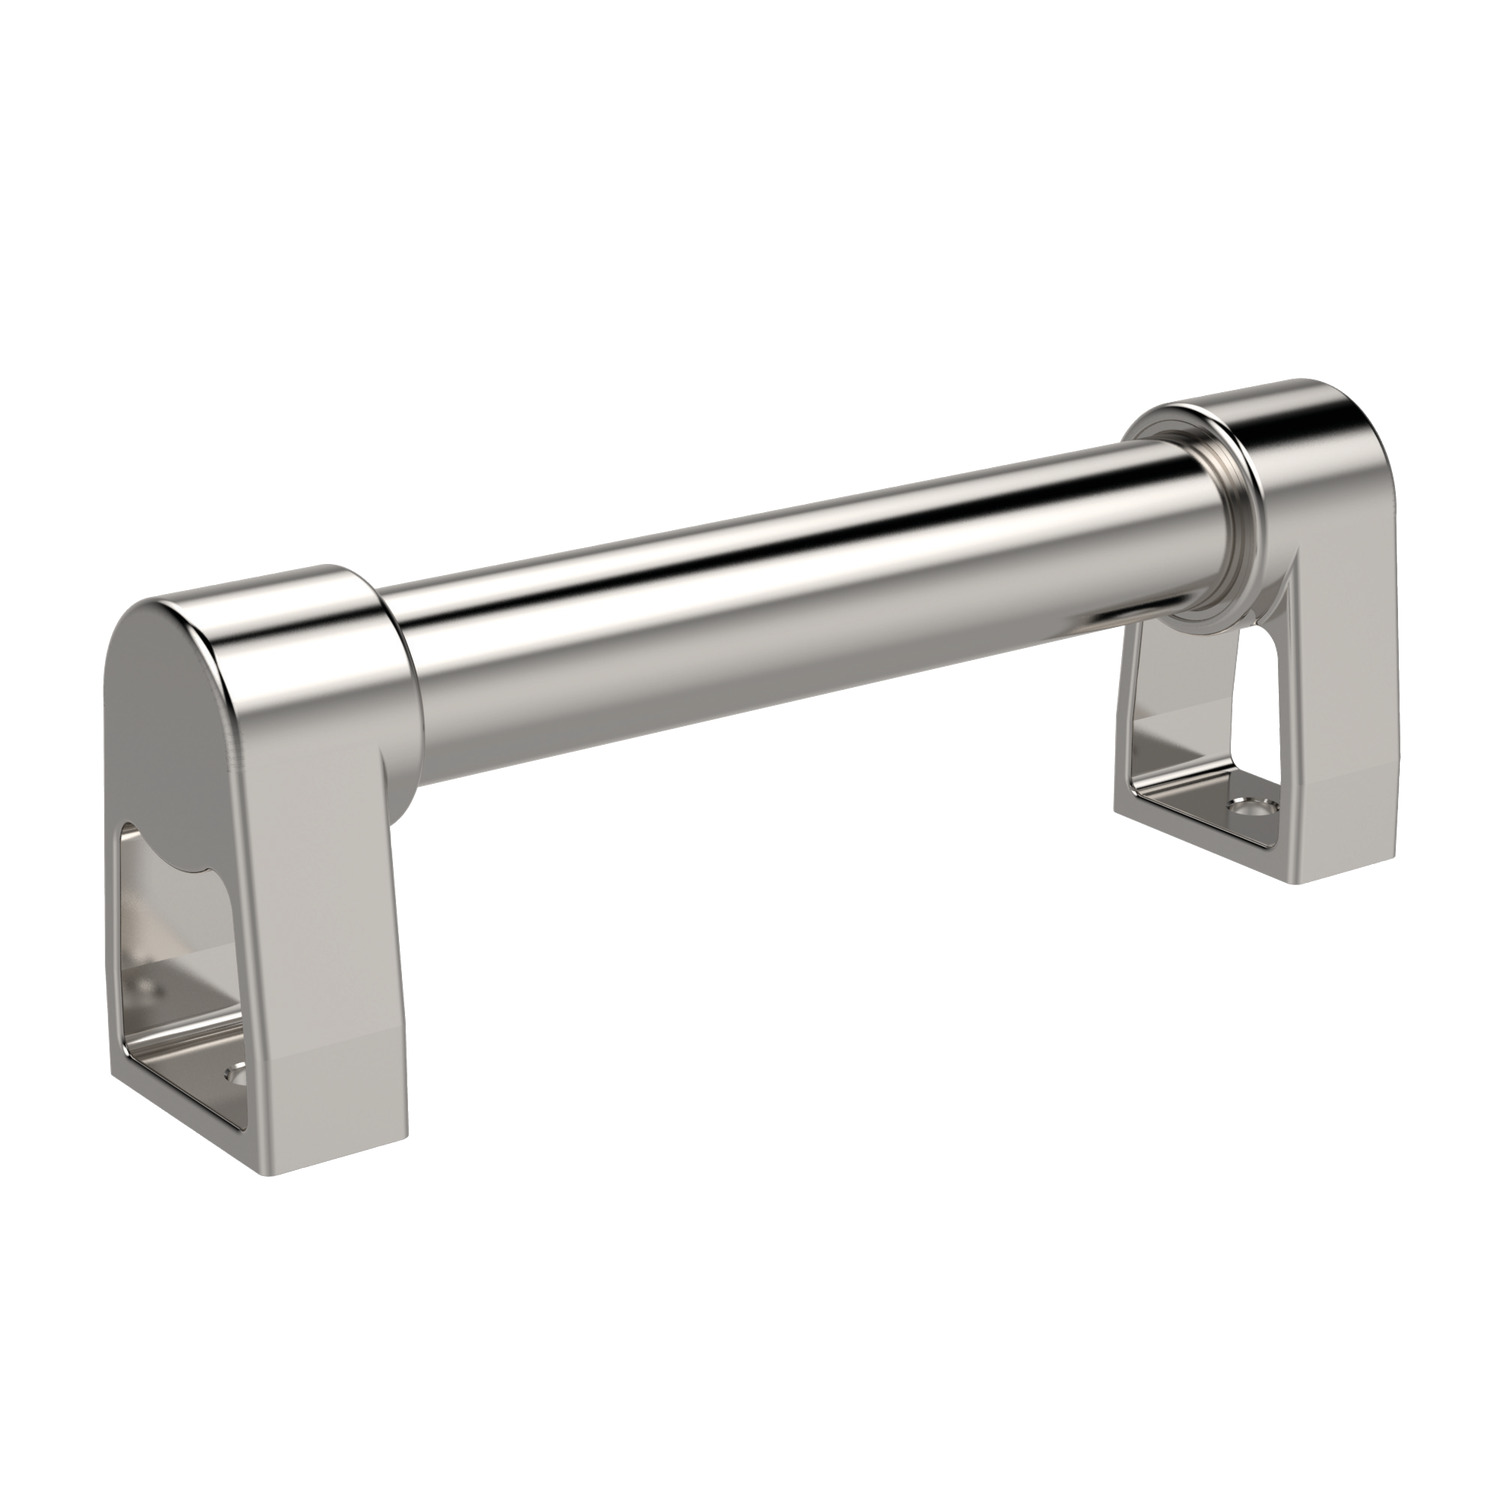 Product 78800, Pull Handles stainless steel / 